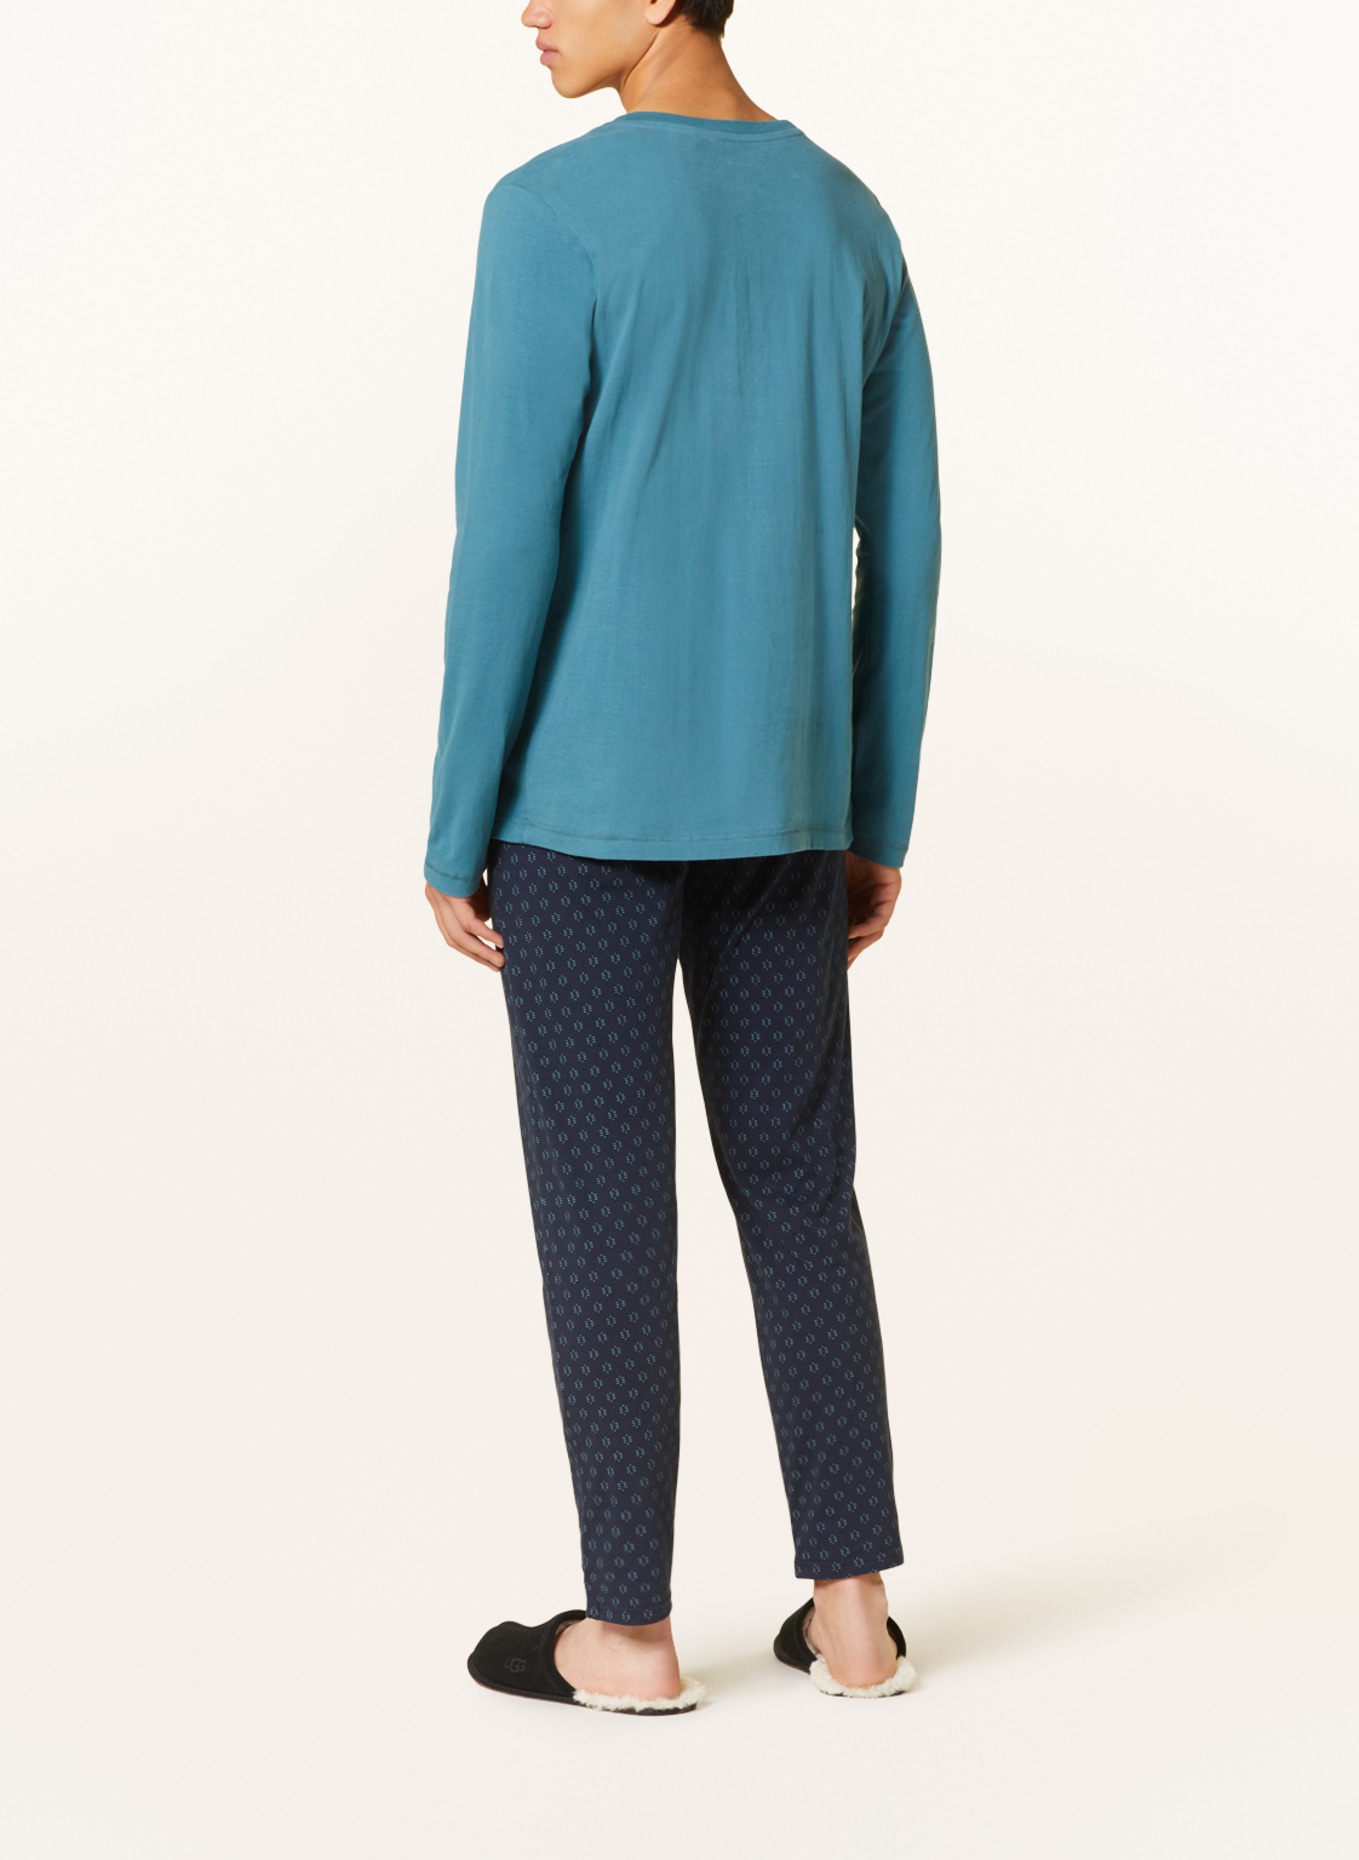 SCHIESSER Pajama shirt MIX+RELAX, Color: TEAL (Image 3)